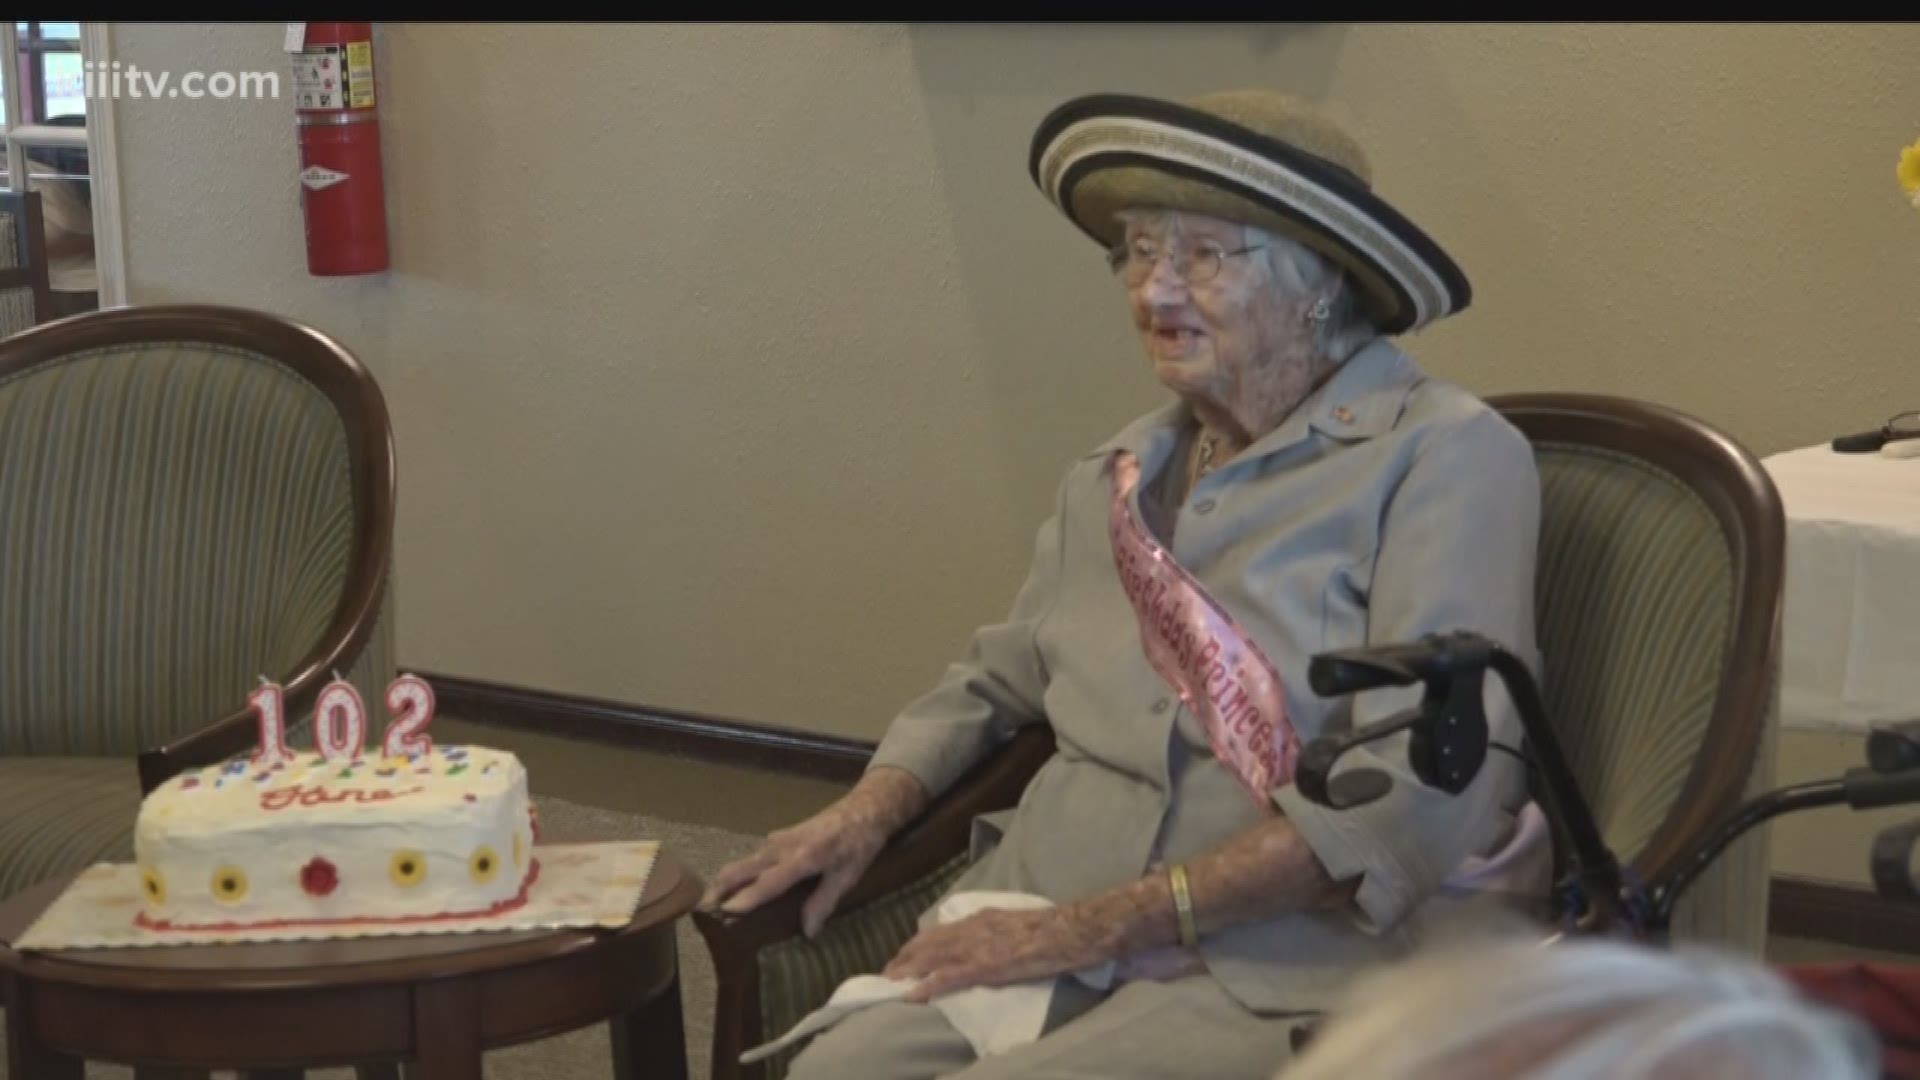 A woman in Portland, Texas, is grateful to enjoy another year of life. Thursday marked her 102nd birthday.